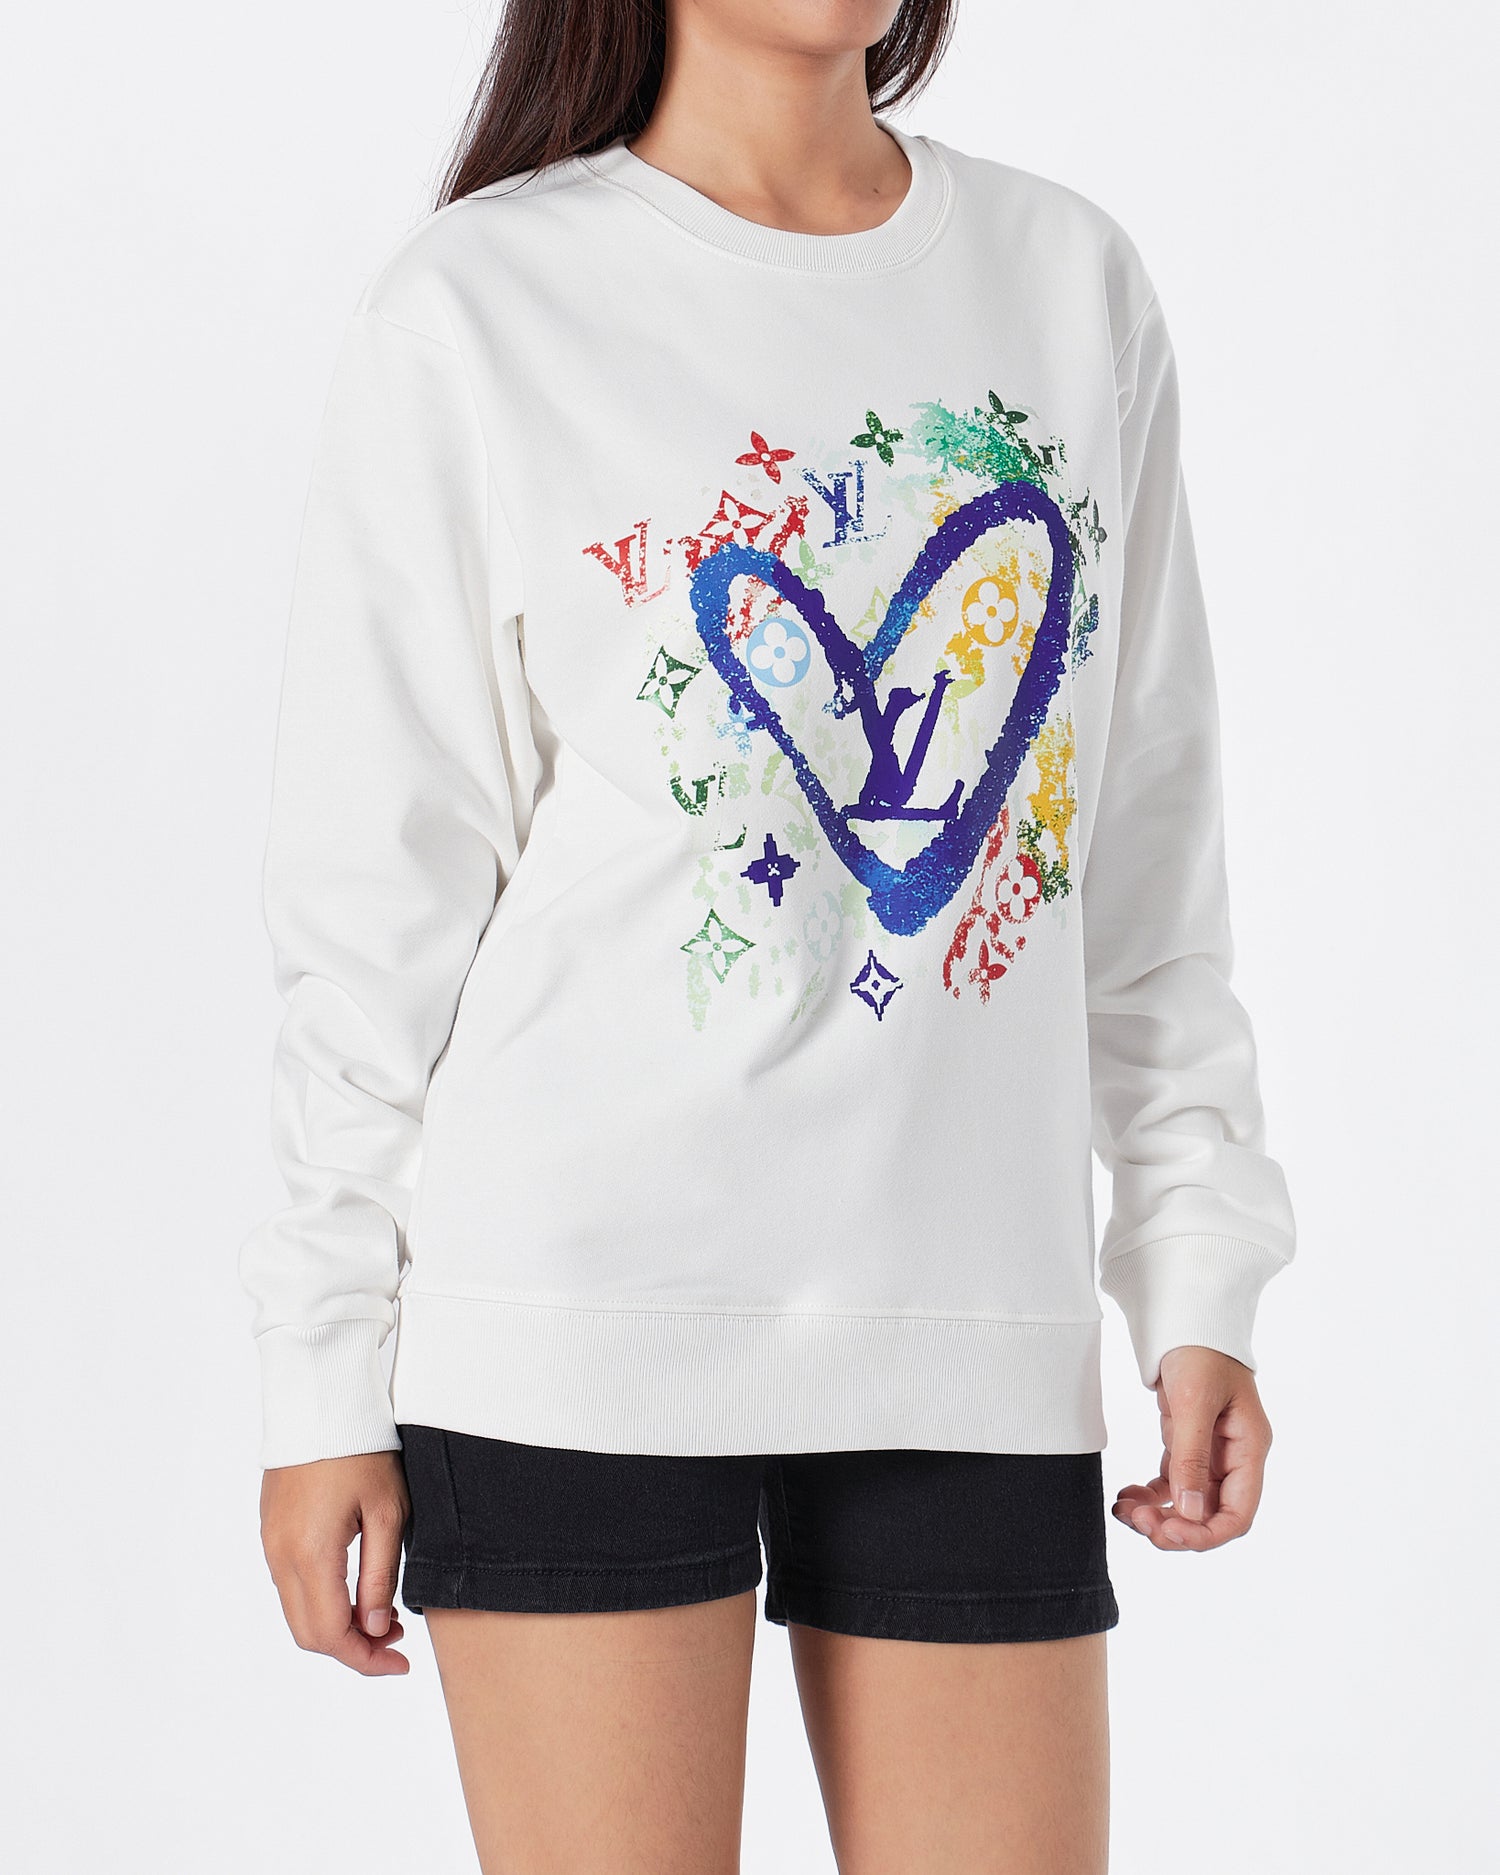 lv colorful sweater